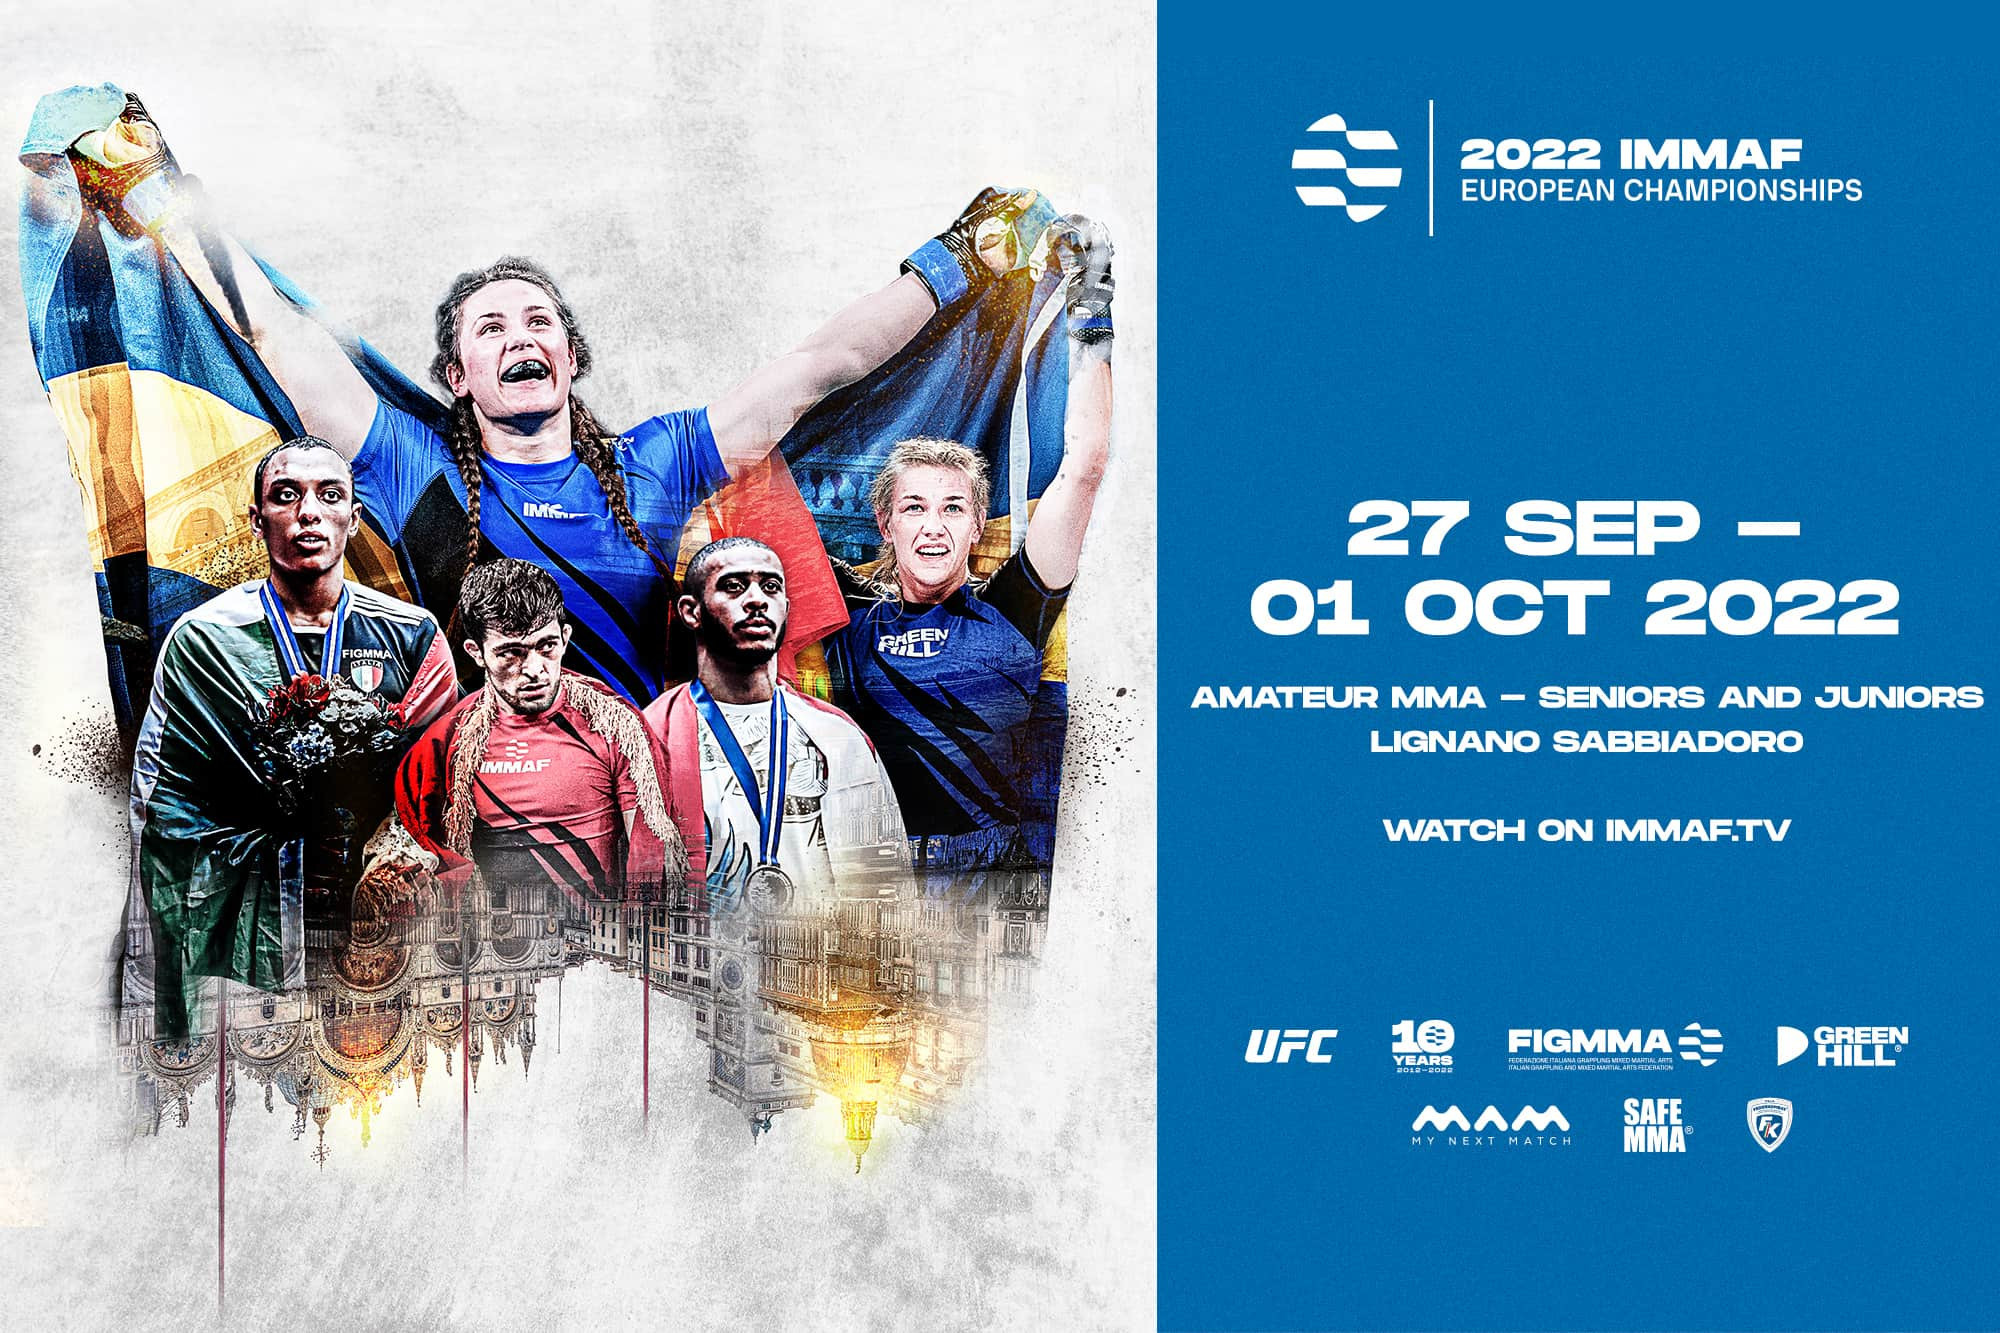 IMMAF announces provisional list of contestants for 2022 European Championships